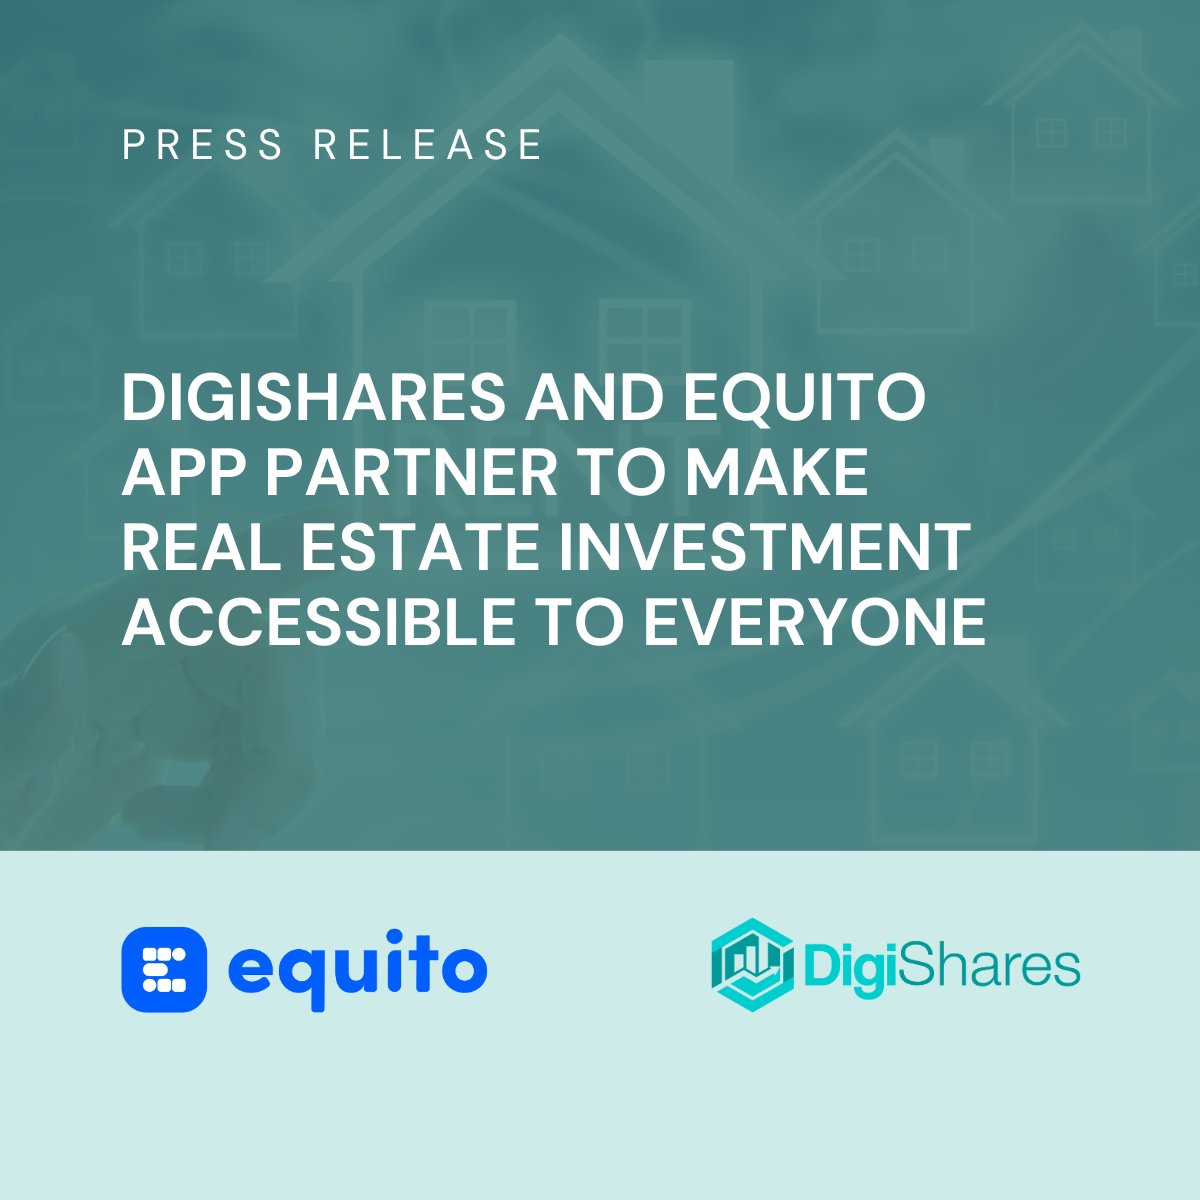 DigiShares is excited to announce a strategic partnership with Equito App, a Spanish start-up in the #realestate and #fintech domain. This partnership aims to enable anyone to #invest in real estate starting from €100, in just 2 minutes, and receive monthly rental income. ✅…